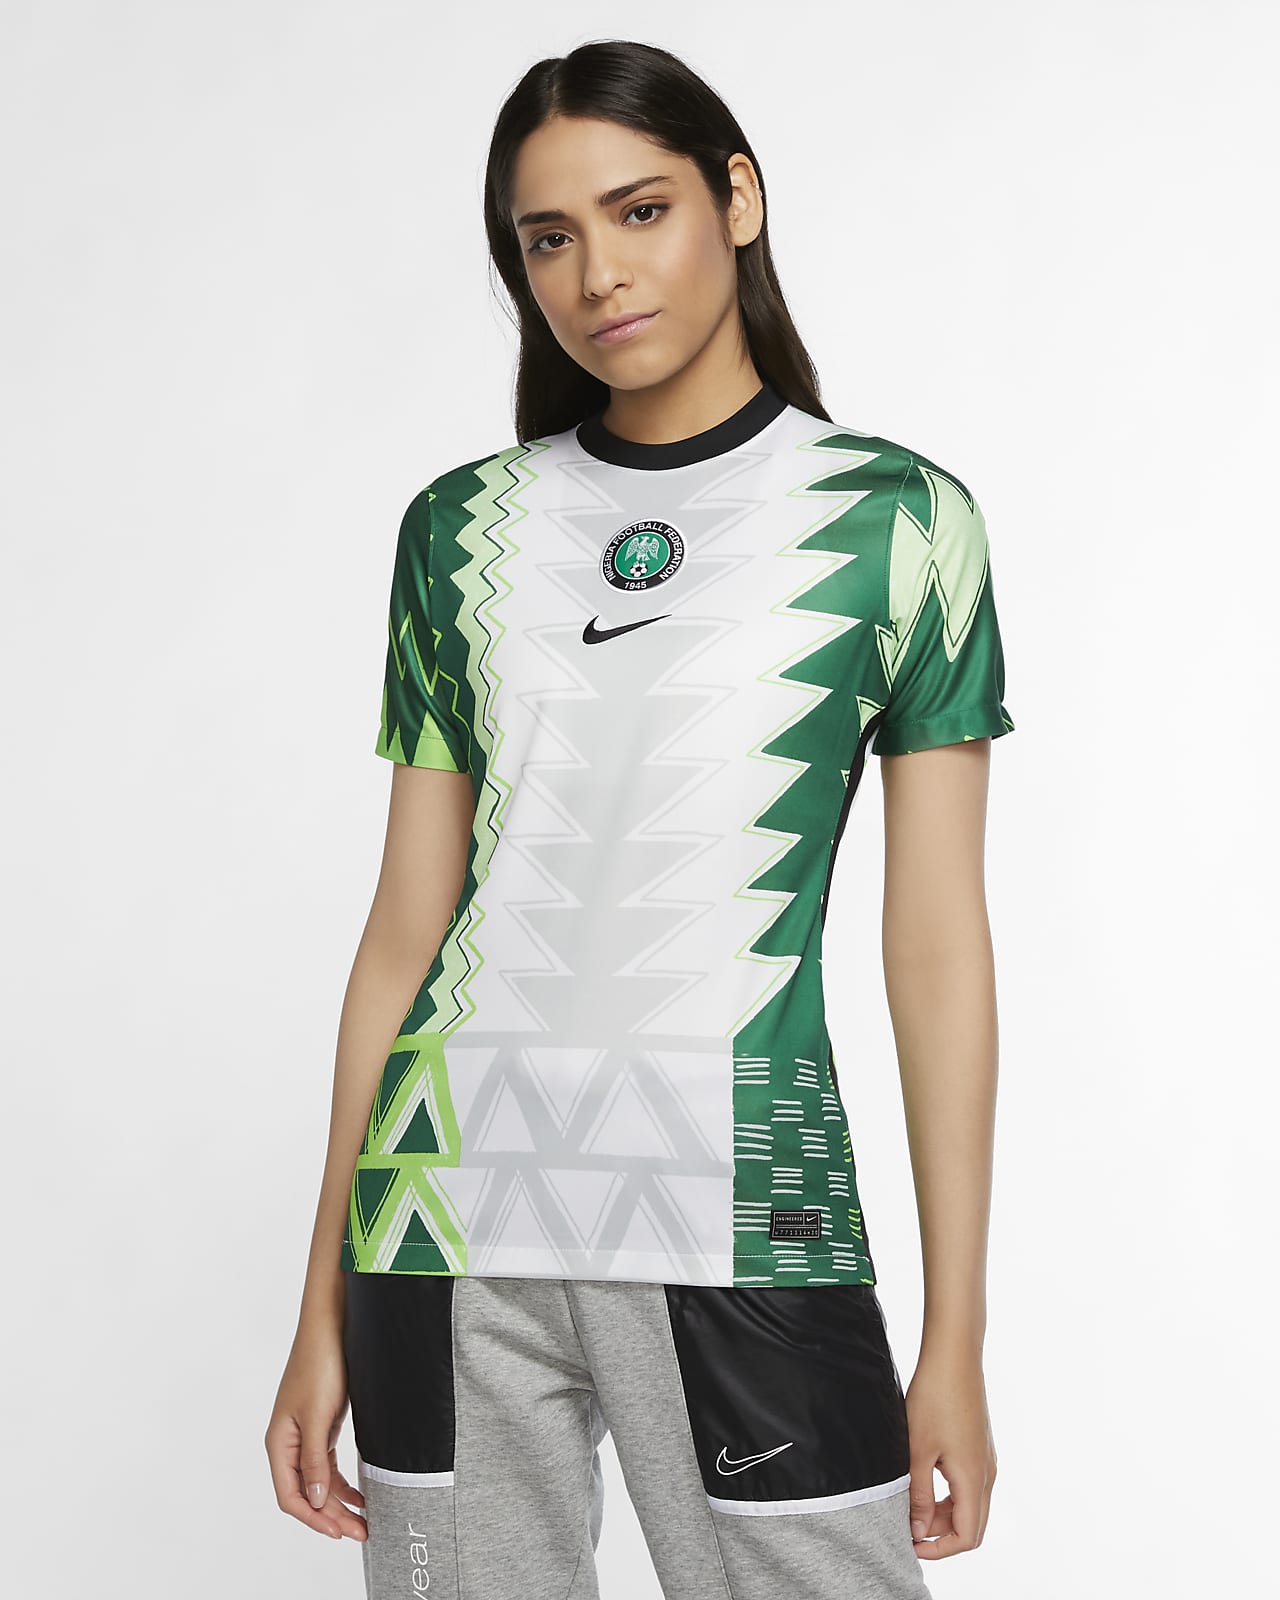 Details about   Nigeria Prematch Home Soccer Football Maglia Jersey Shirt 2020 2021 